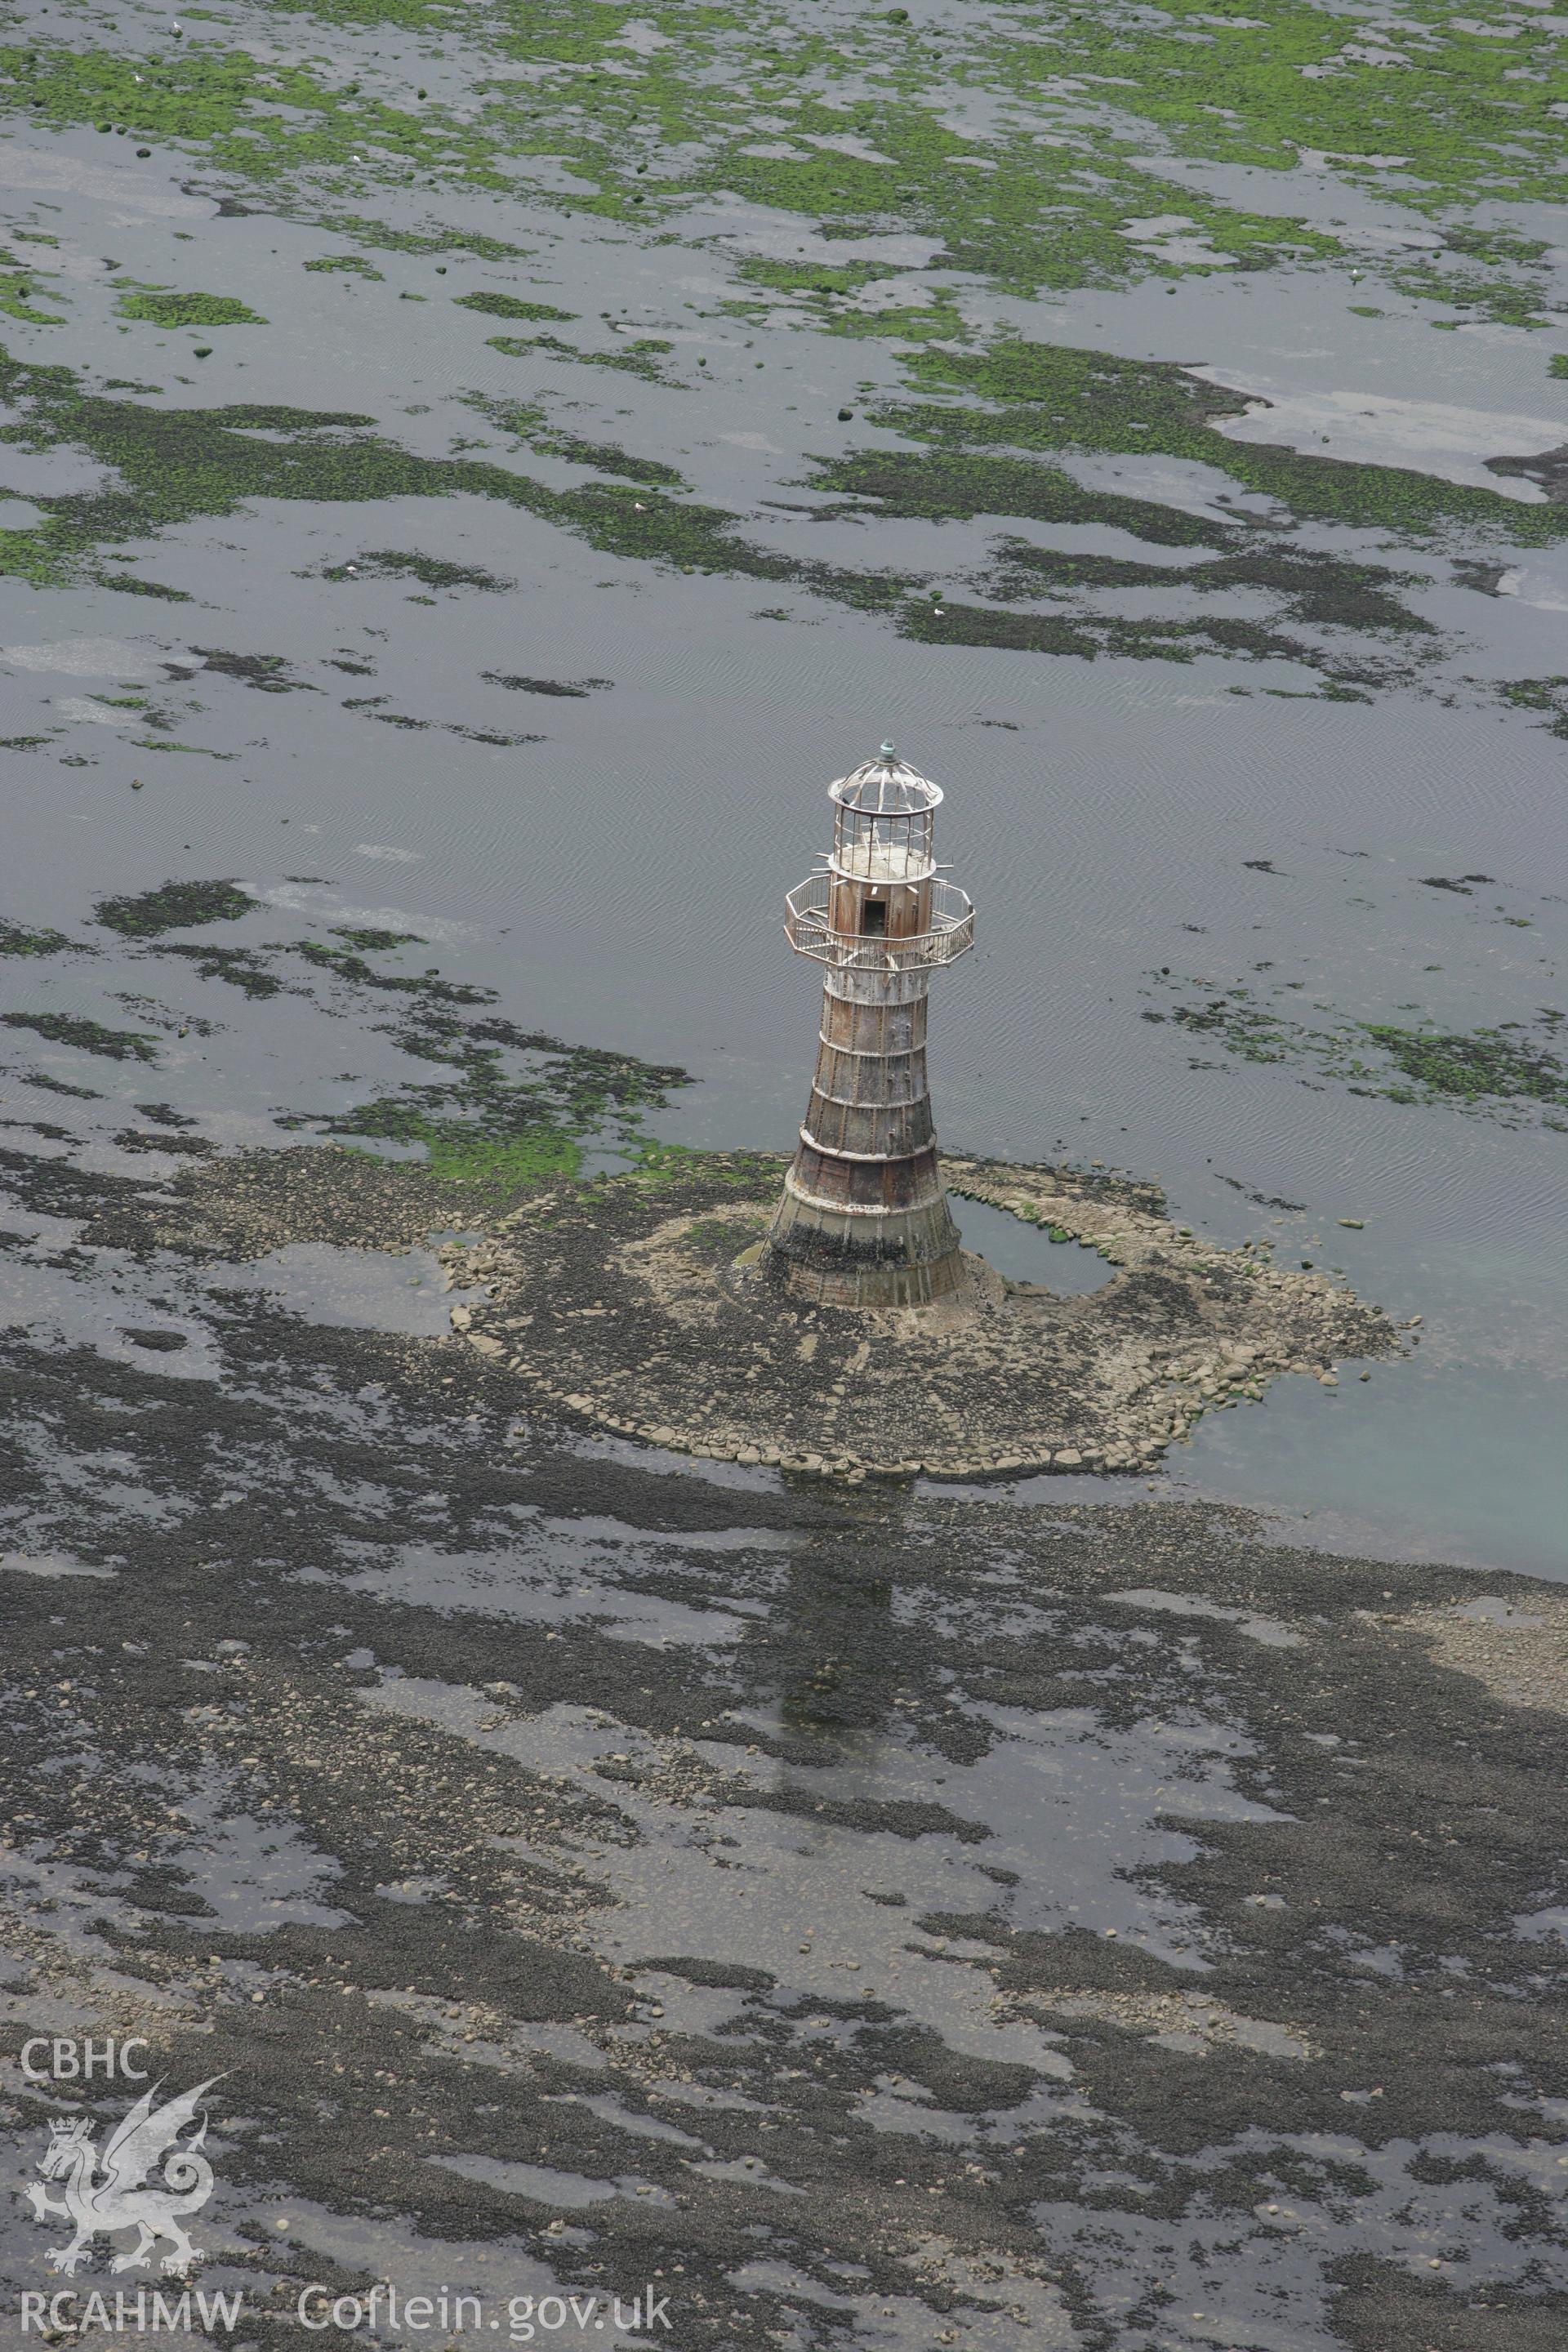 RCAHMW colour oblique photograph of Whitford Point Lighthouse. Taken by Toby Driver on 20/06/2008.